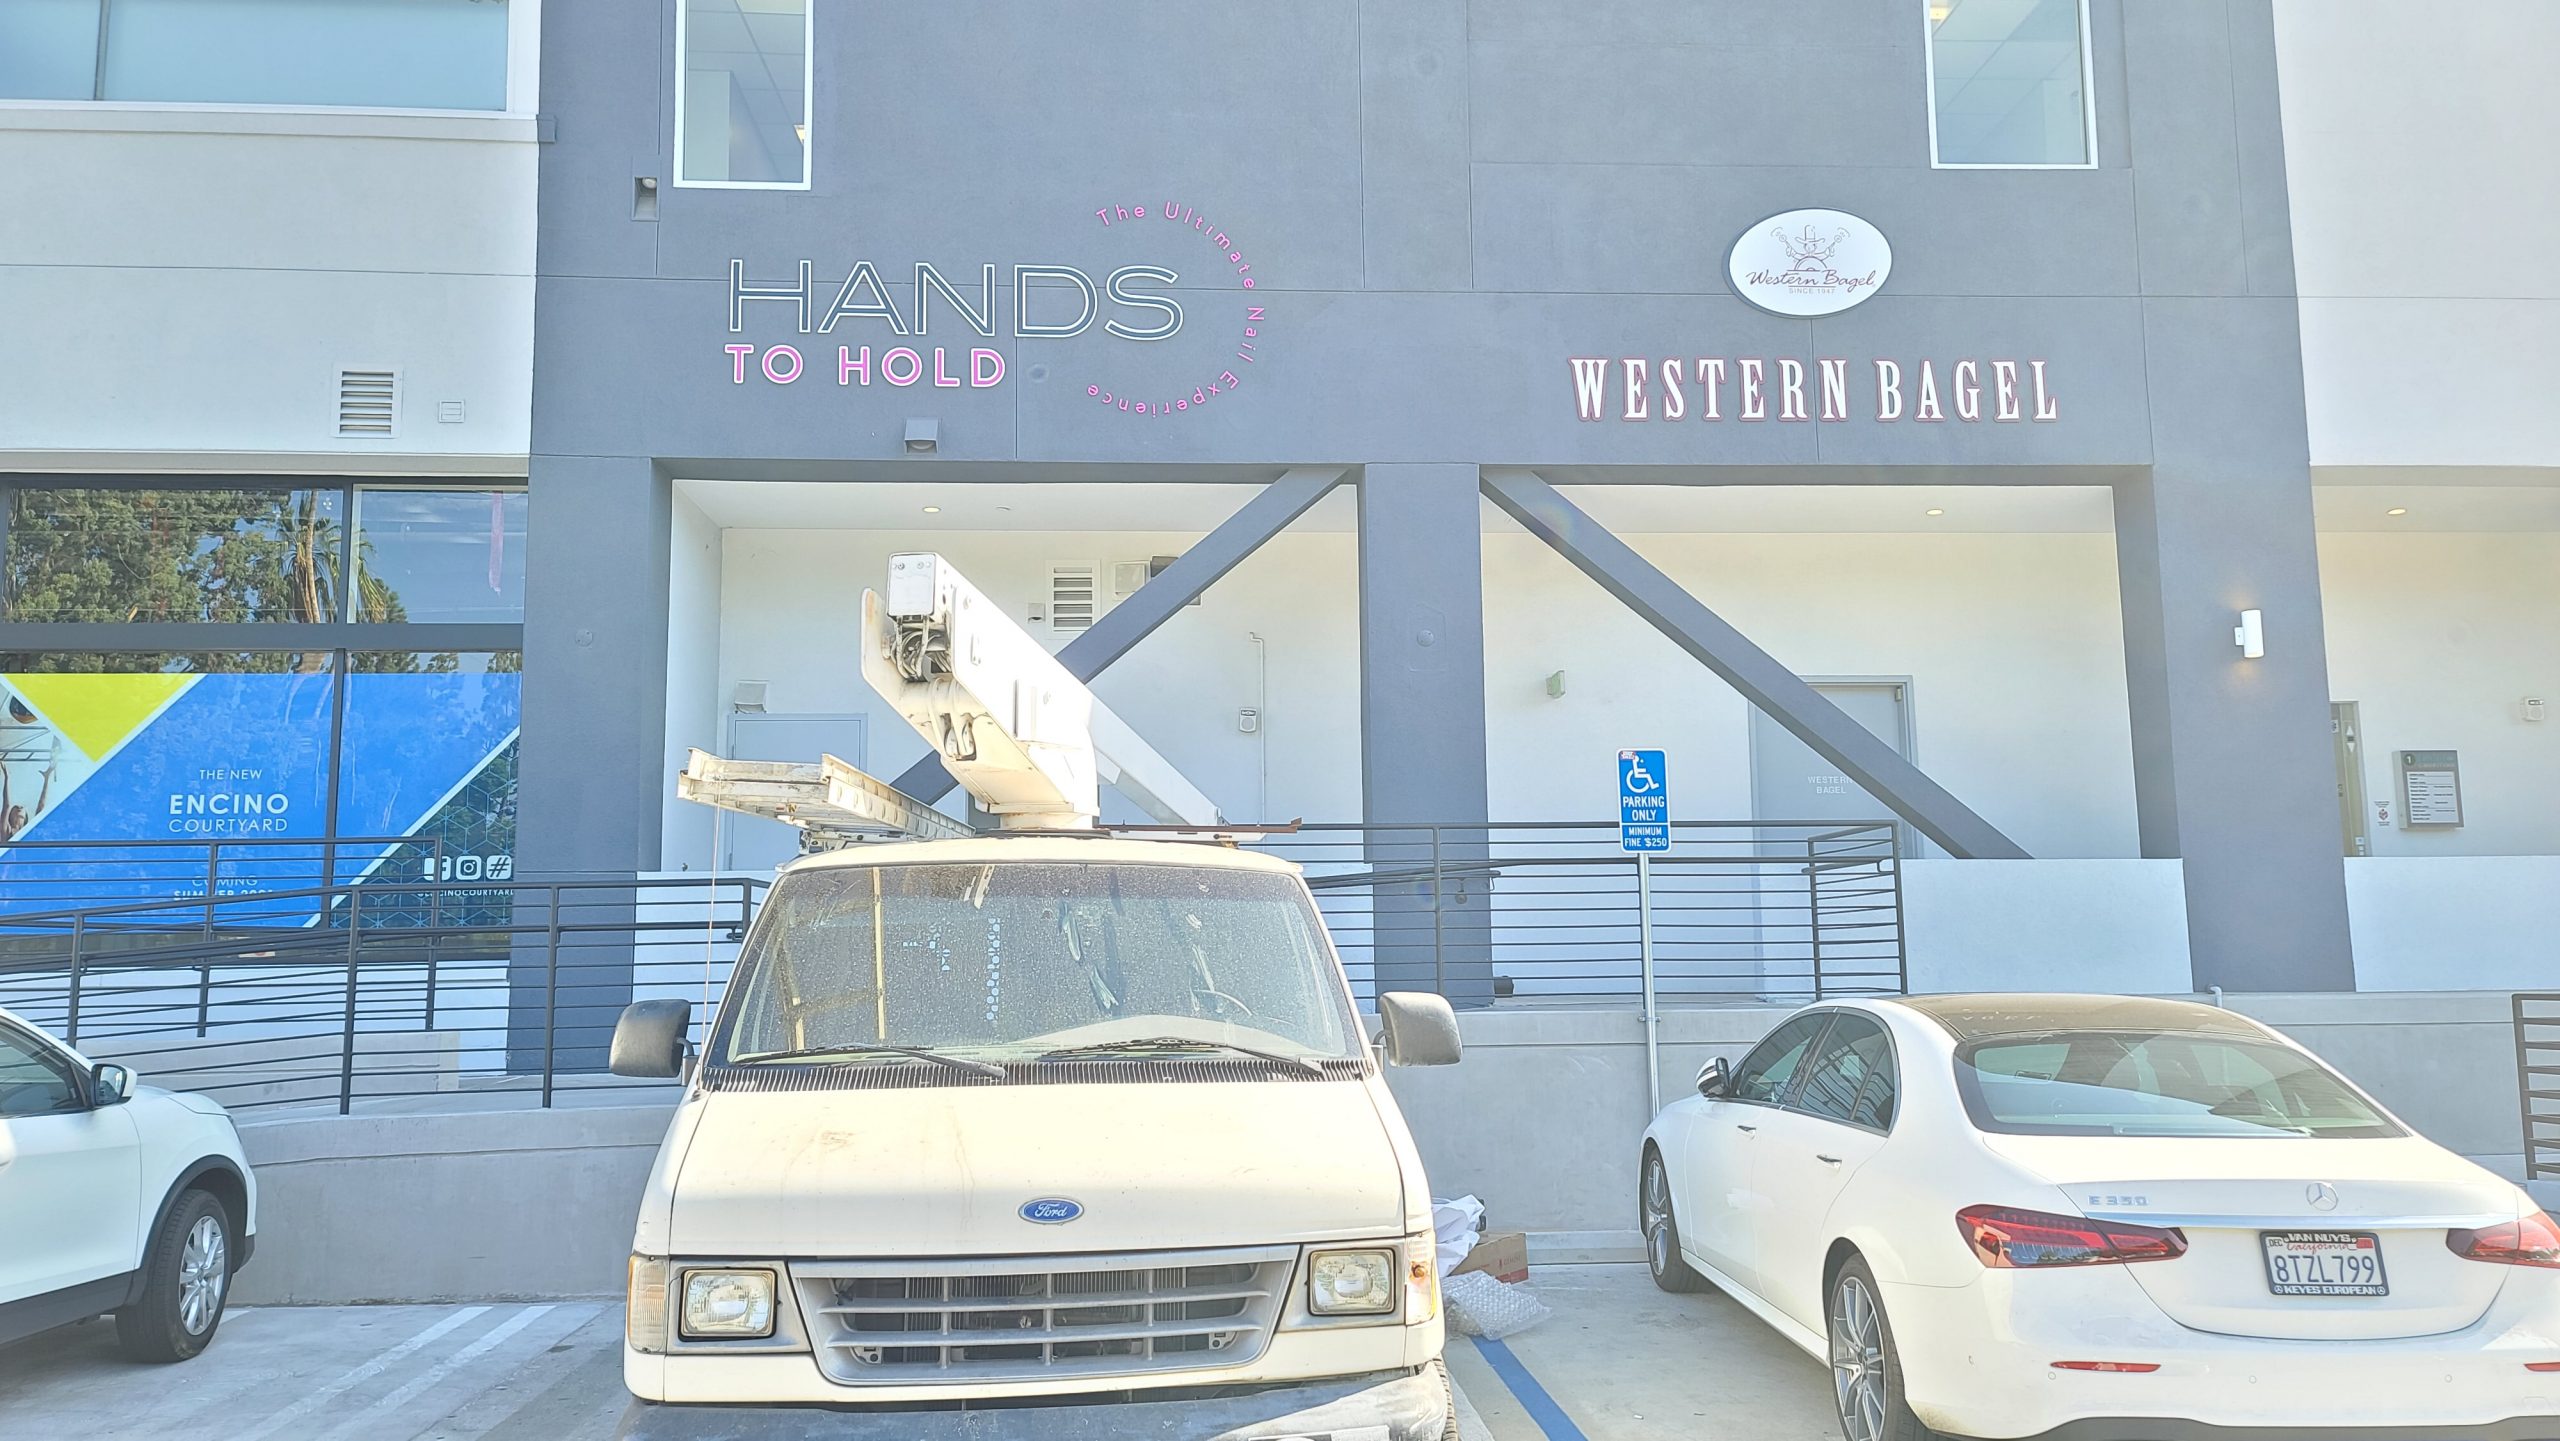 This is the salon sign for Hands to Hold's establishment in Encino Courtyard, it shows potential customers the caliber of the brand's styling services.